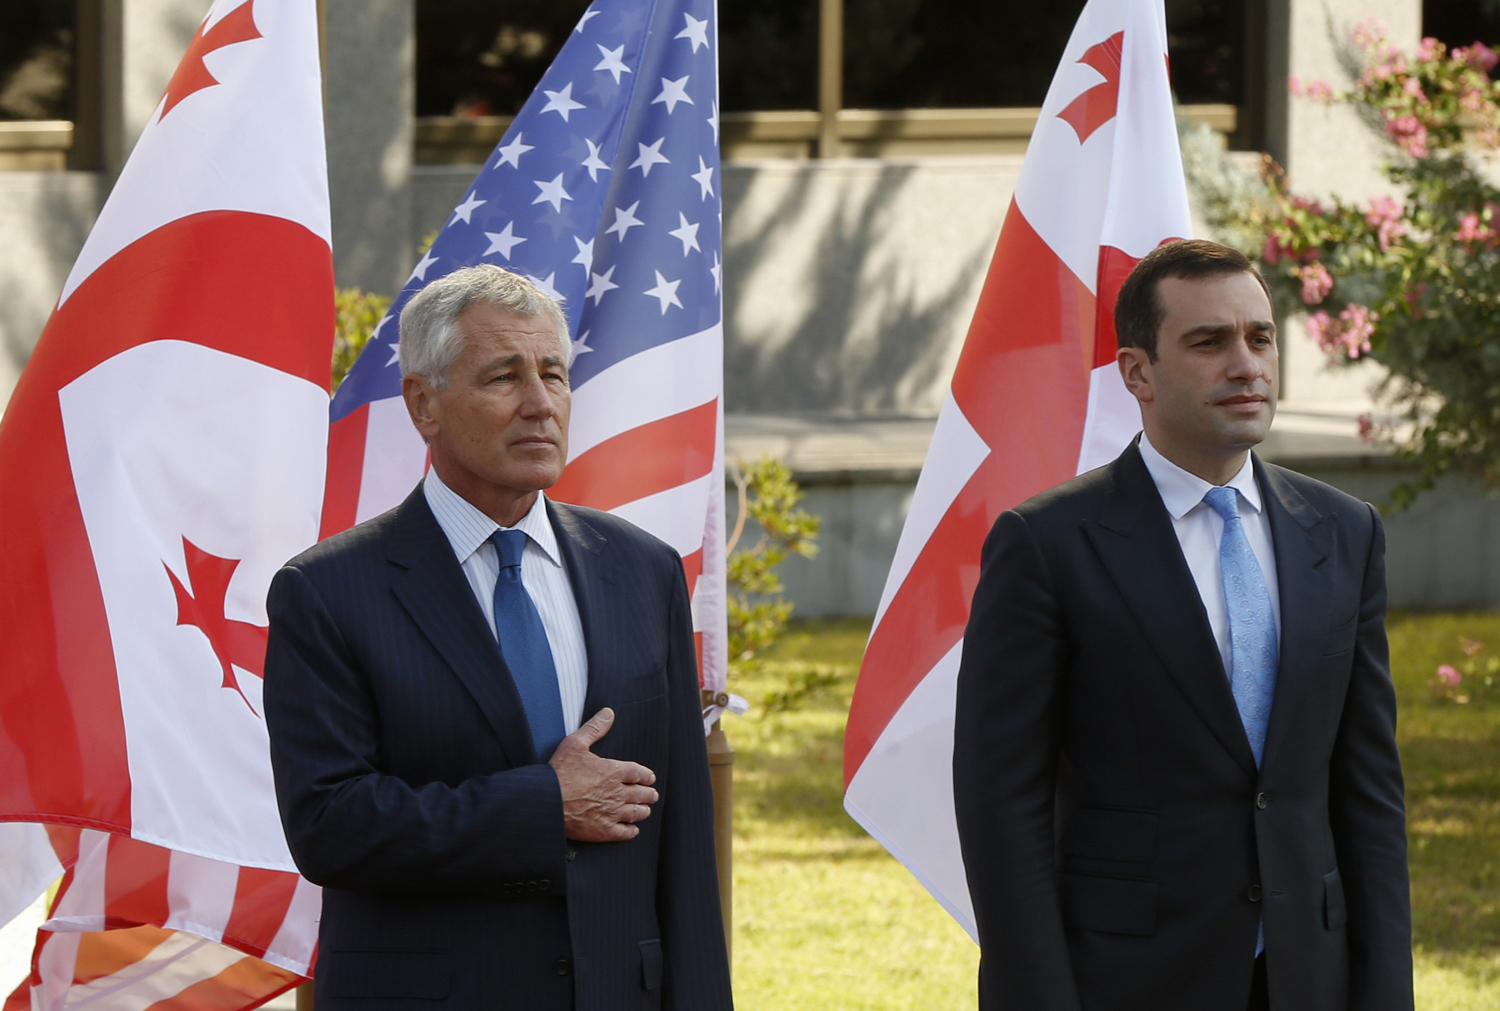 Georgia's Defence Minister Irakly Alasania (R) and U.S. Defense Secretary Chuck Hagel attend an official welcoming ceremony in Tbilisi on September 7, 2014. (David Mdzinarishvili —Reuters)